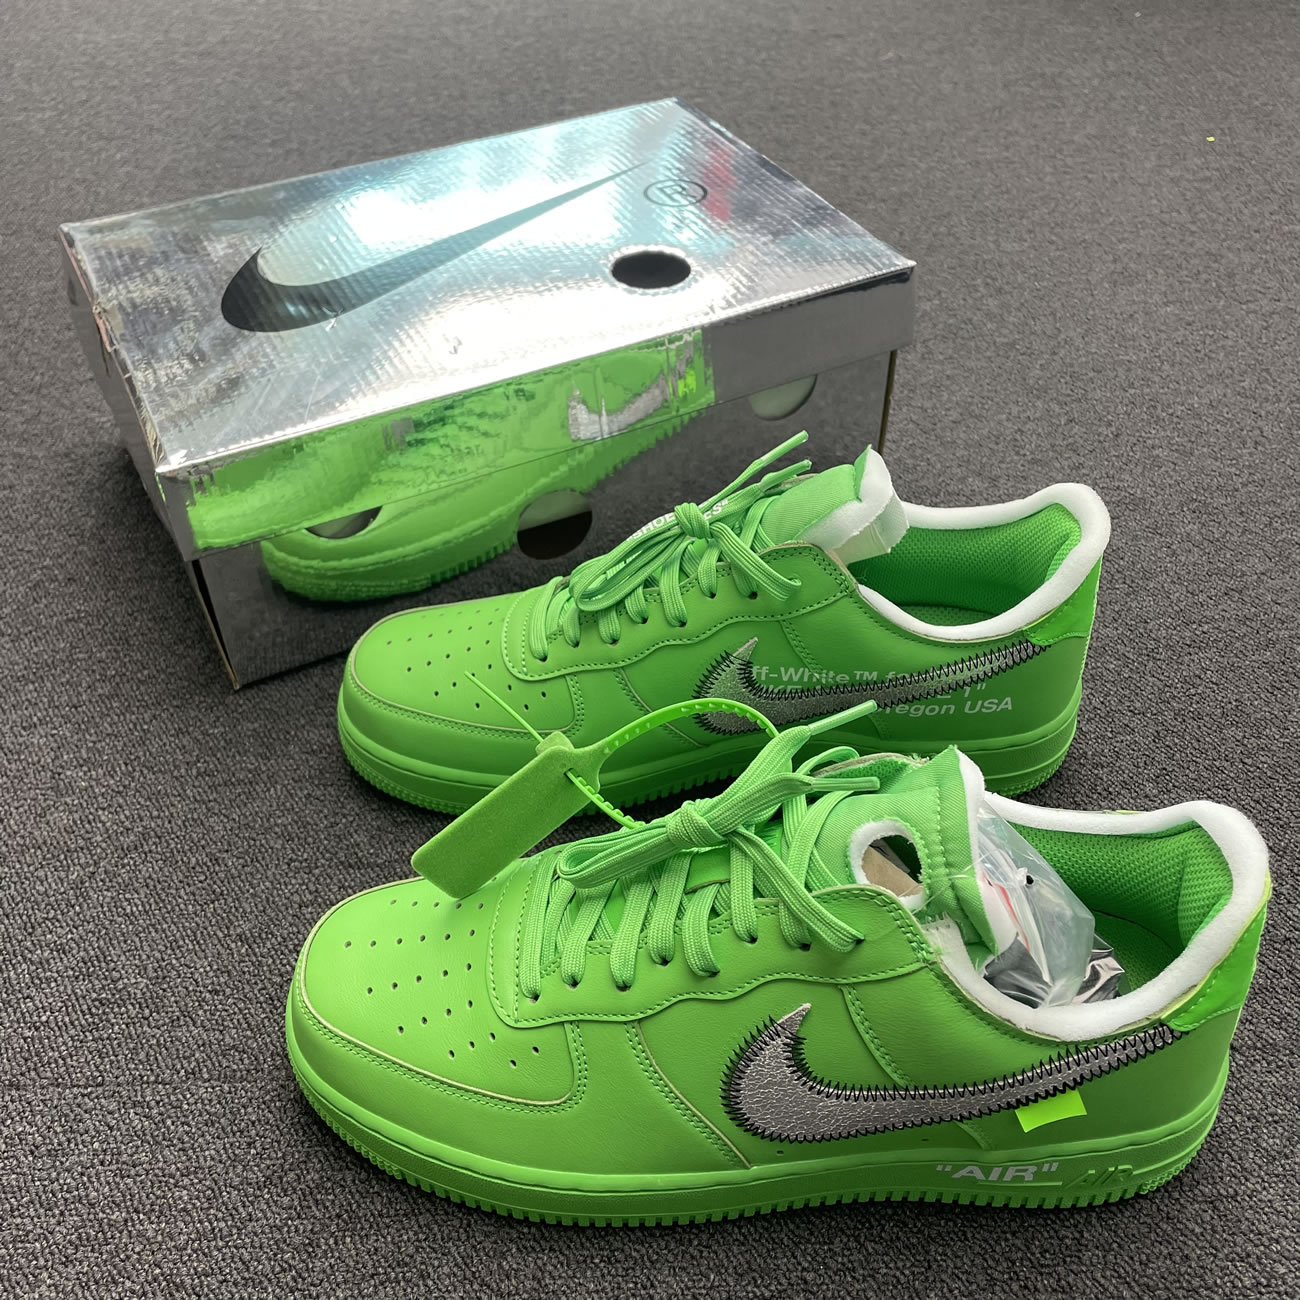 Off White Nike Air Force 1 Low Light Green (45) - newkick.org